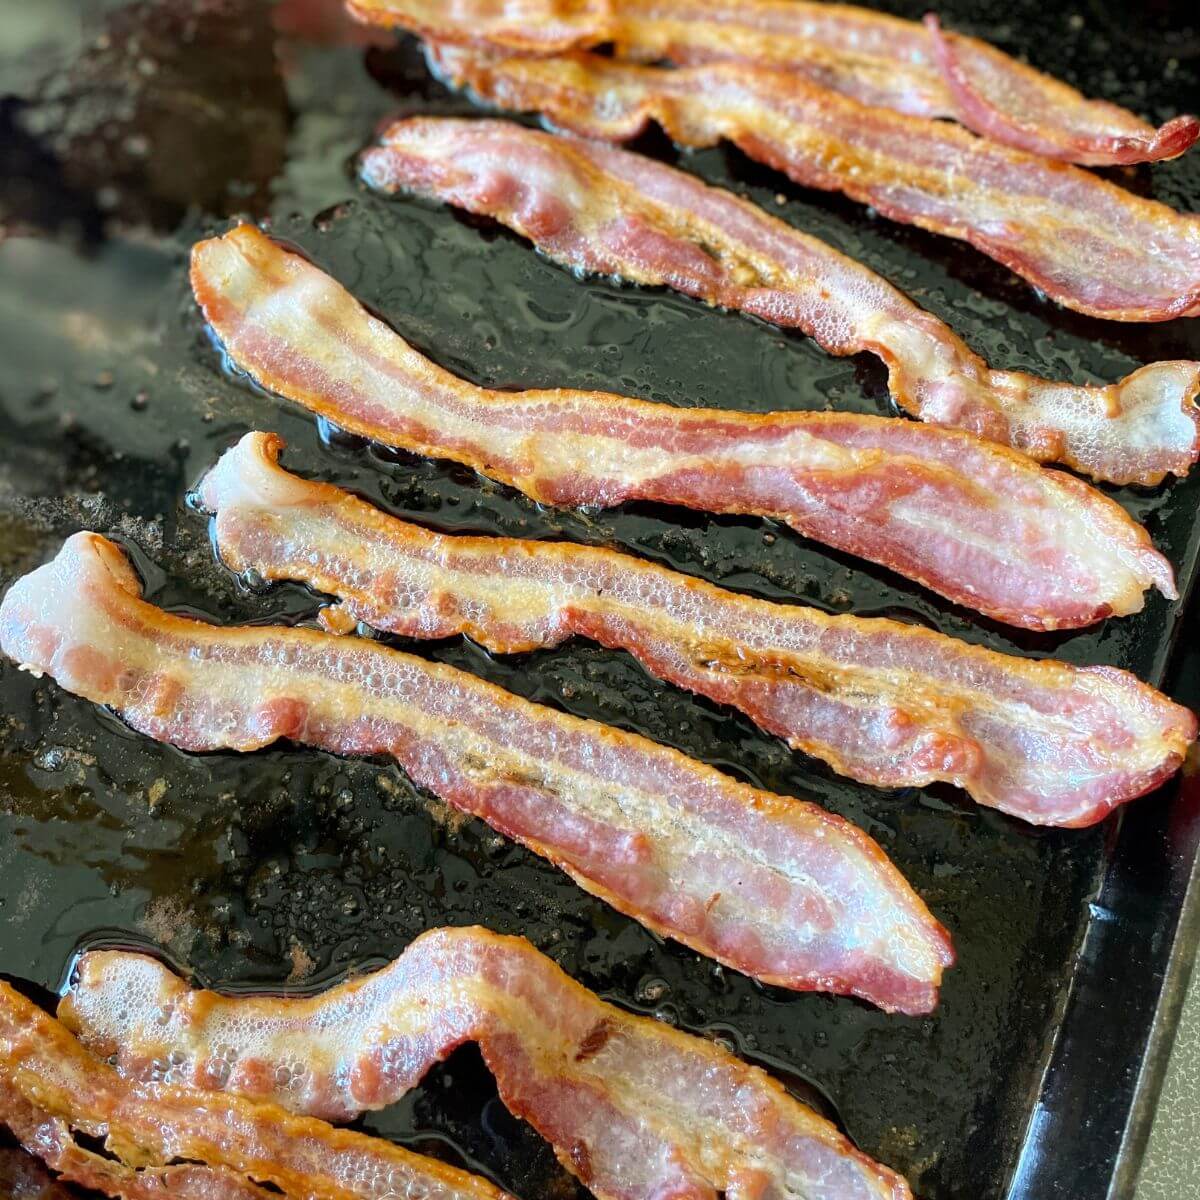 https://theflattopking.com/wp-content/uploads/2023/05/bacon-on-the-griddle.jpg